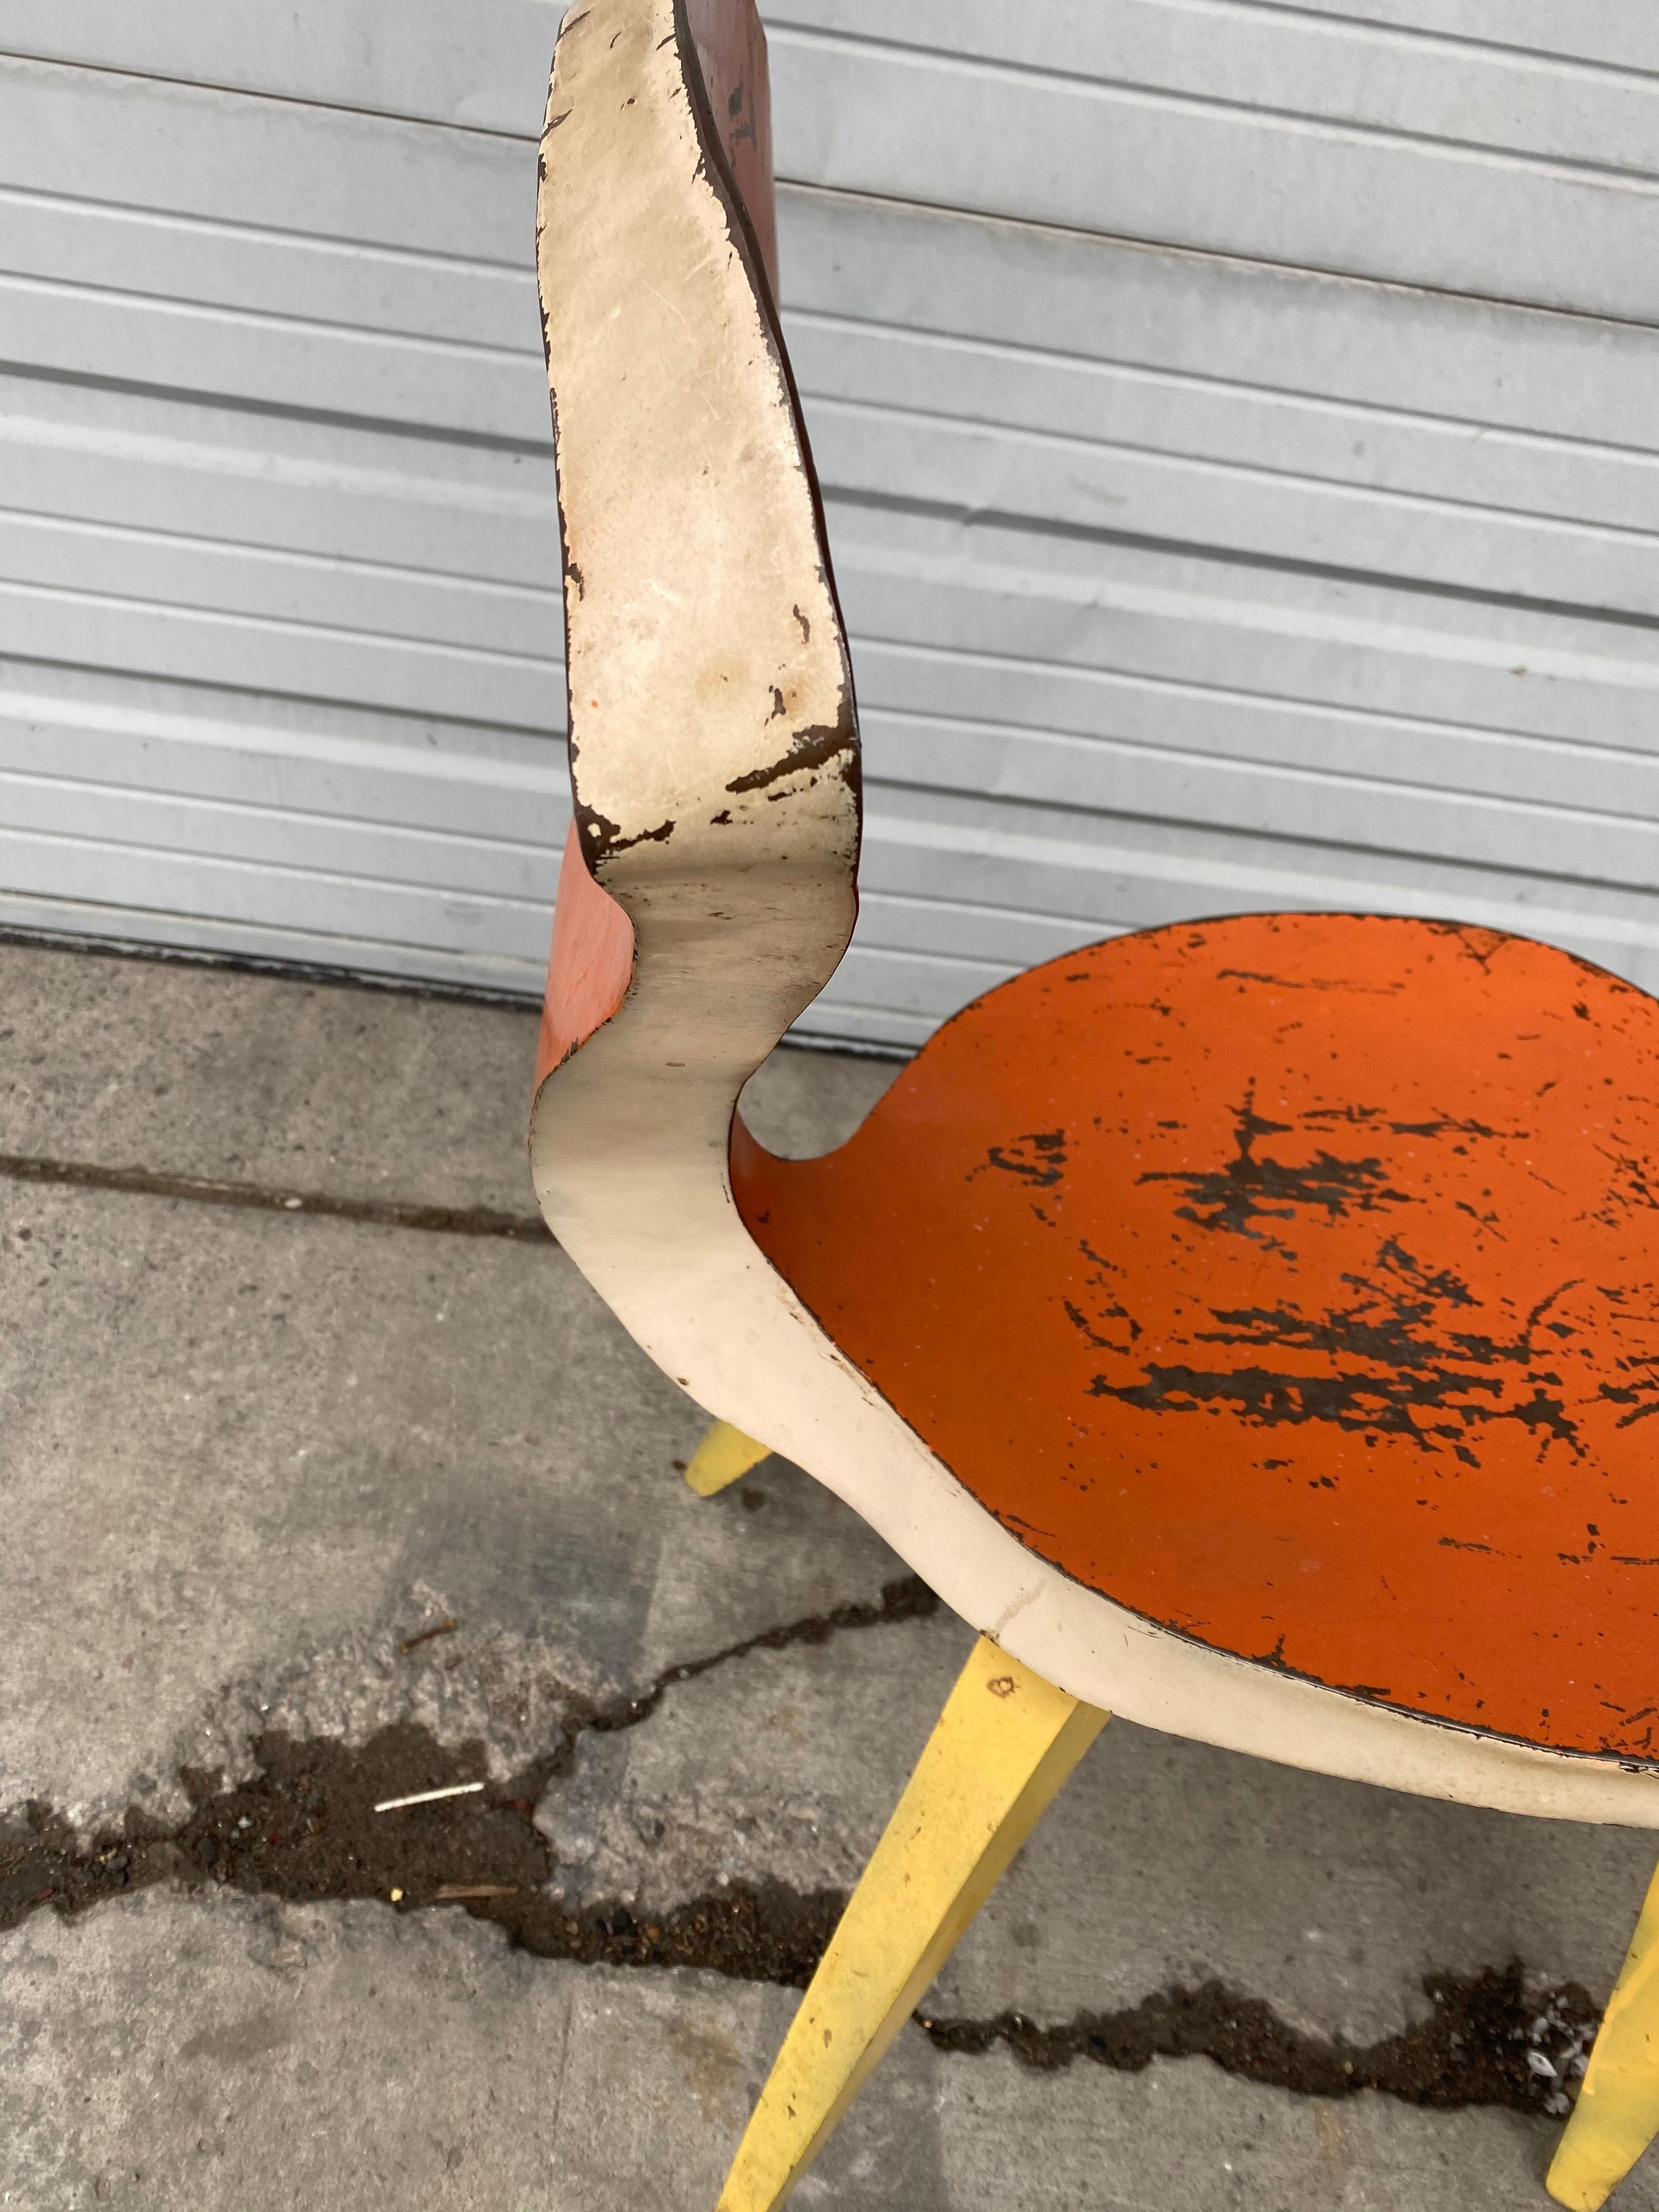 Folk Art welded steel chair / sculpture handmade /designed and built after the iconic bentwood side chair by Norman Cherner, amazing quality, construction, clean, flawless seams. Retains its original paint, wonderful, whimsical take on a Mid-Century